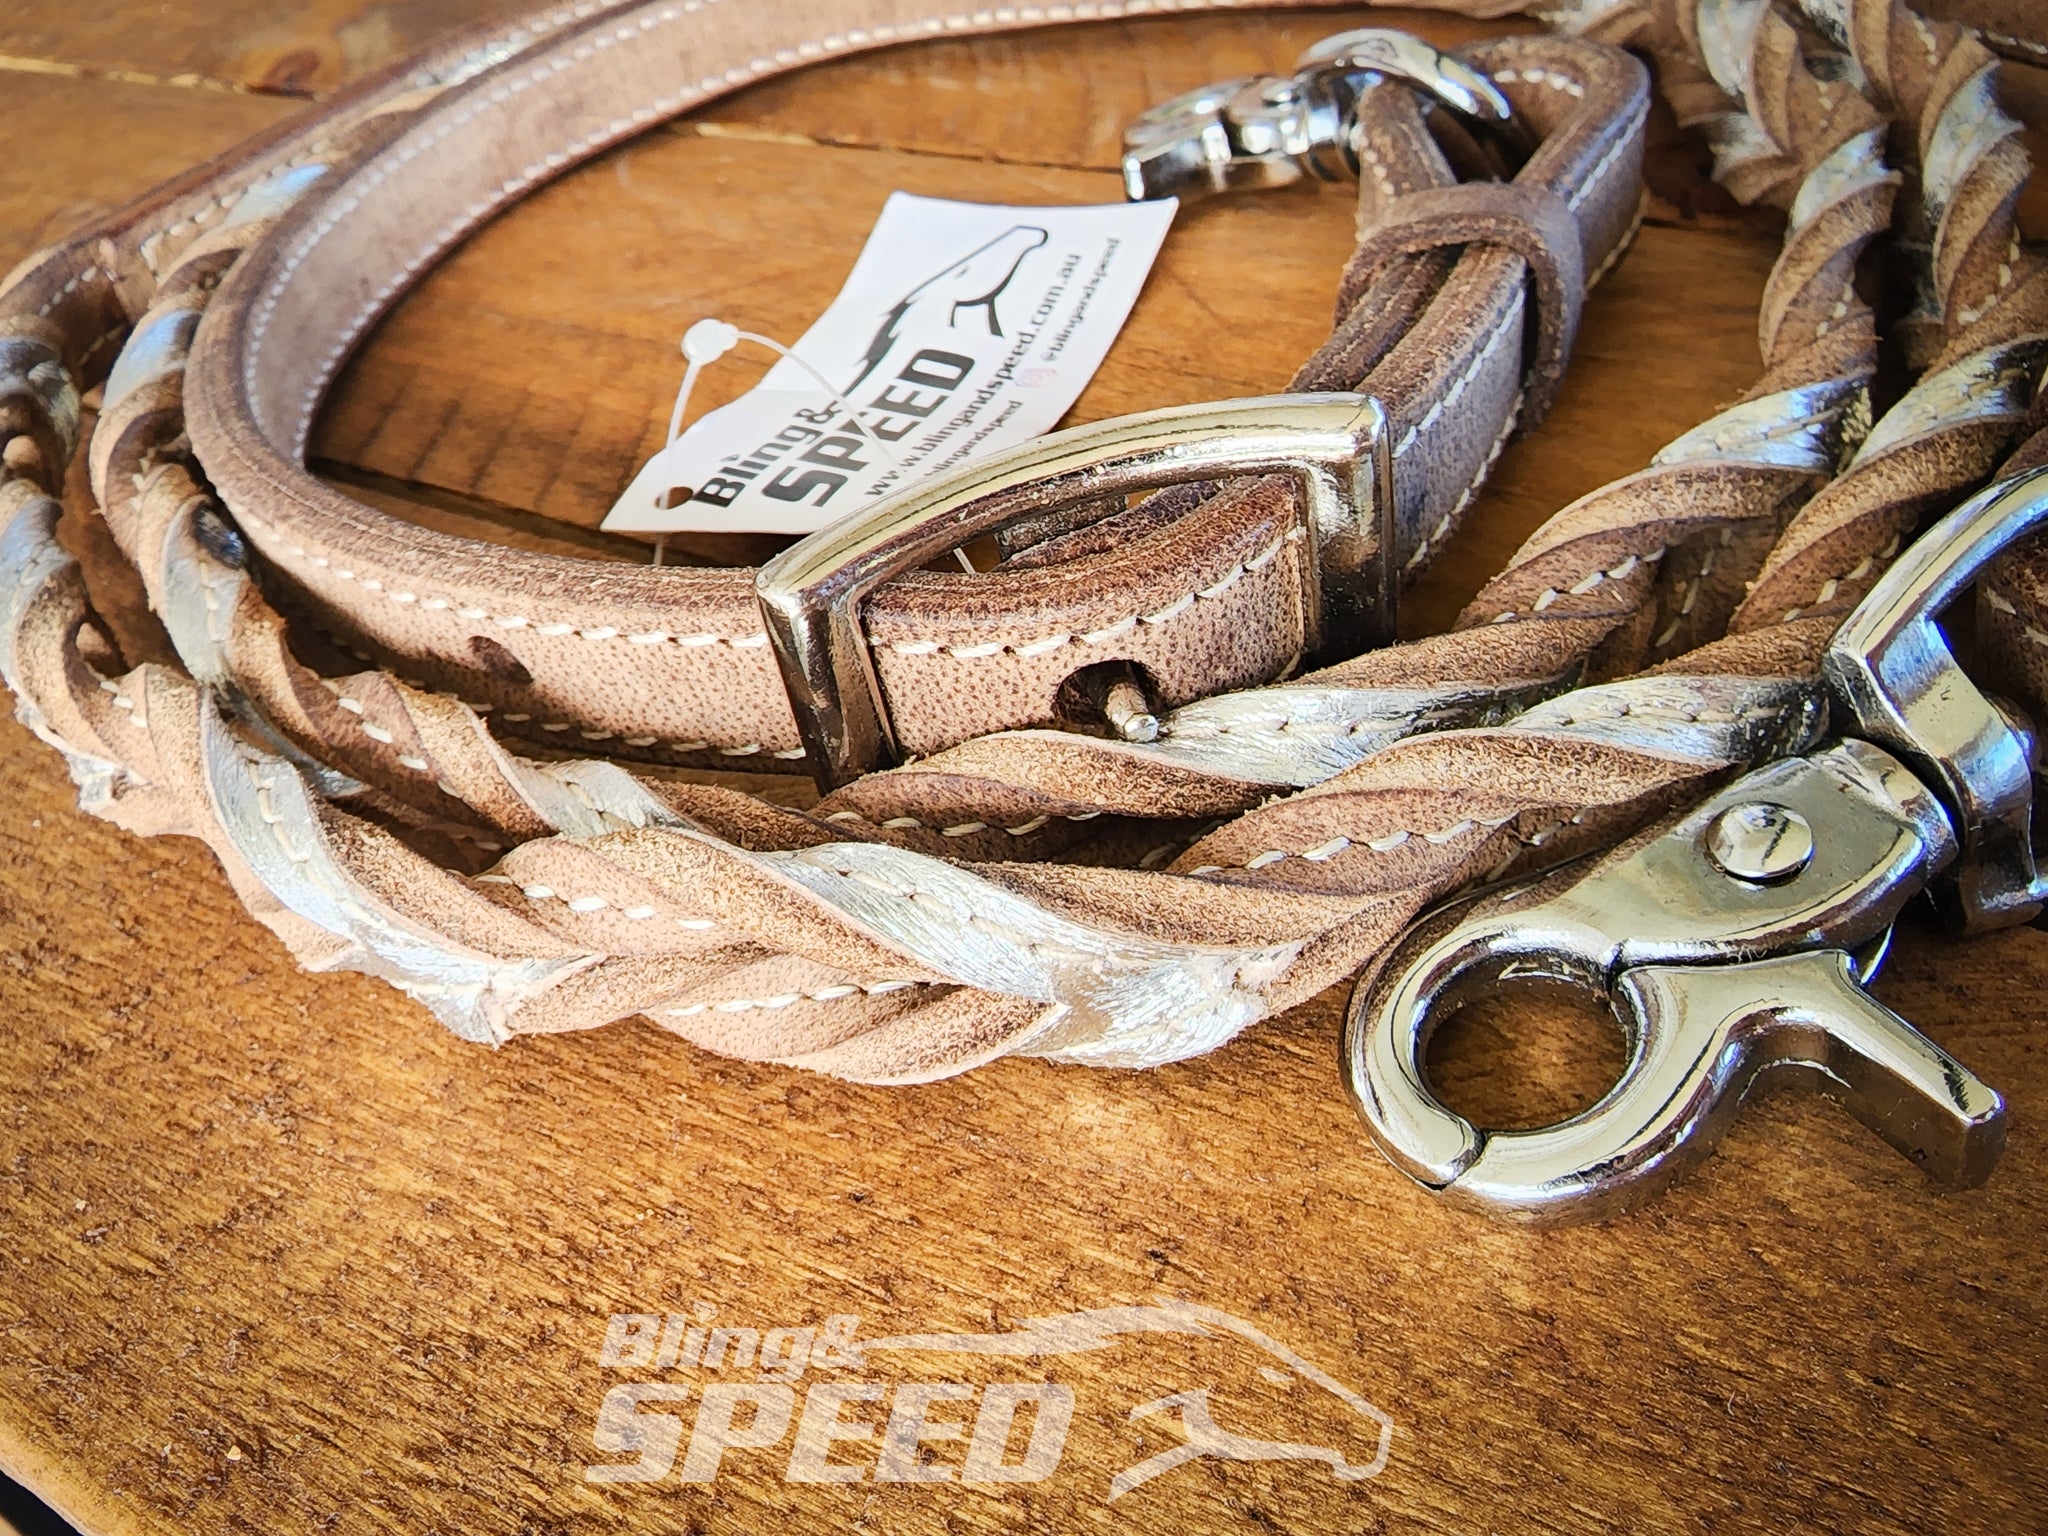 Bling & Speed Silver Twisted Bloodknot Bridle with matching Barrel Reins (7987702366446)